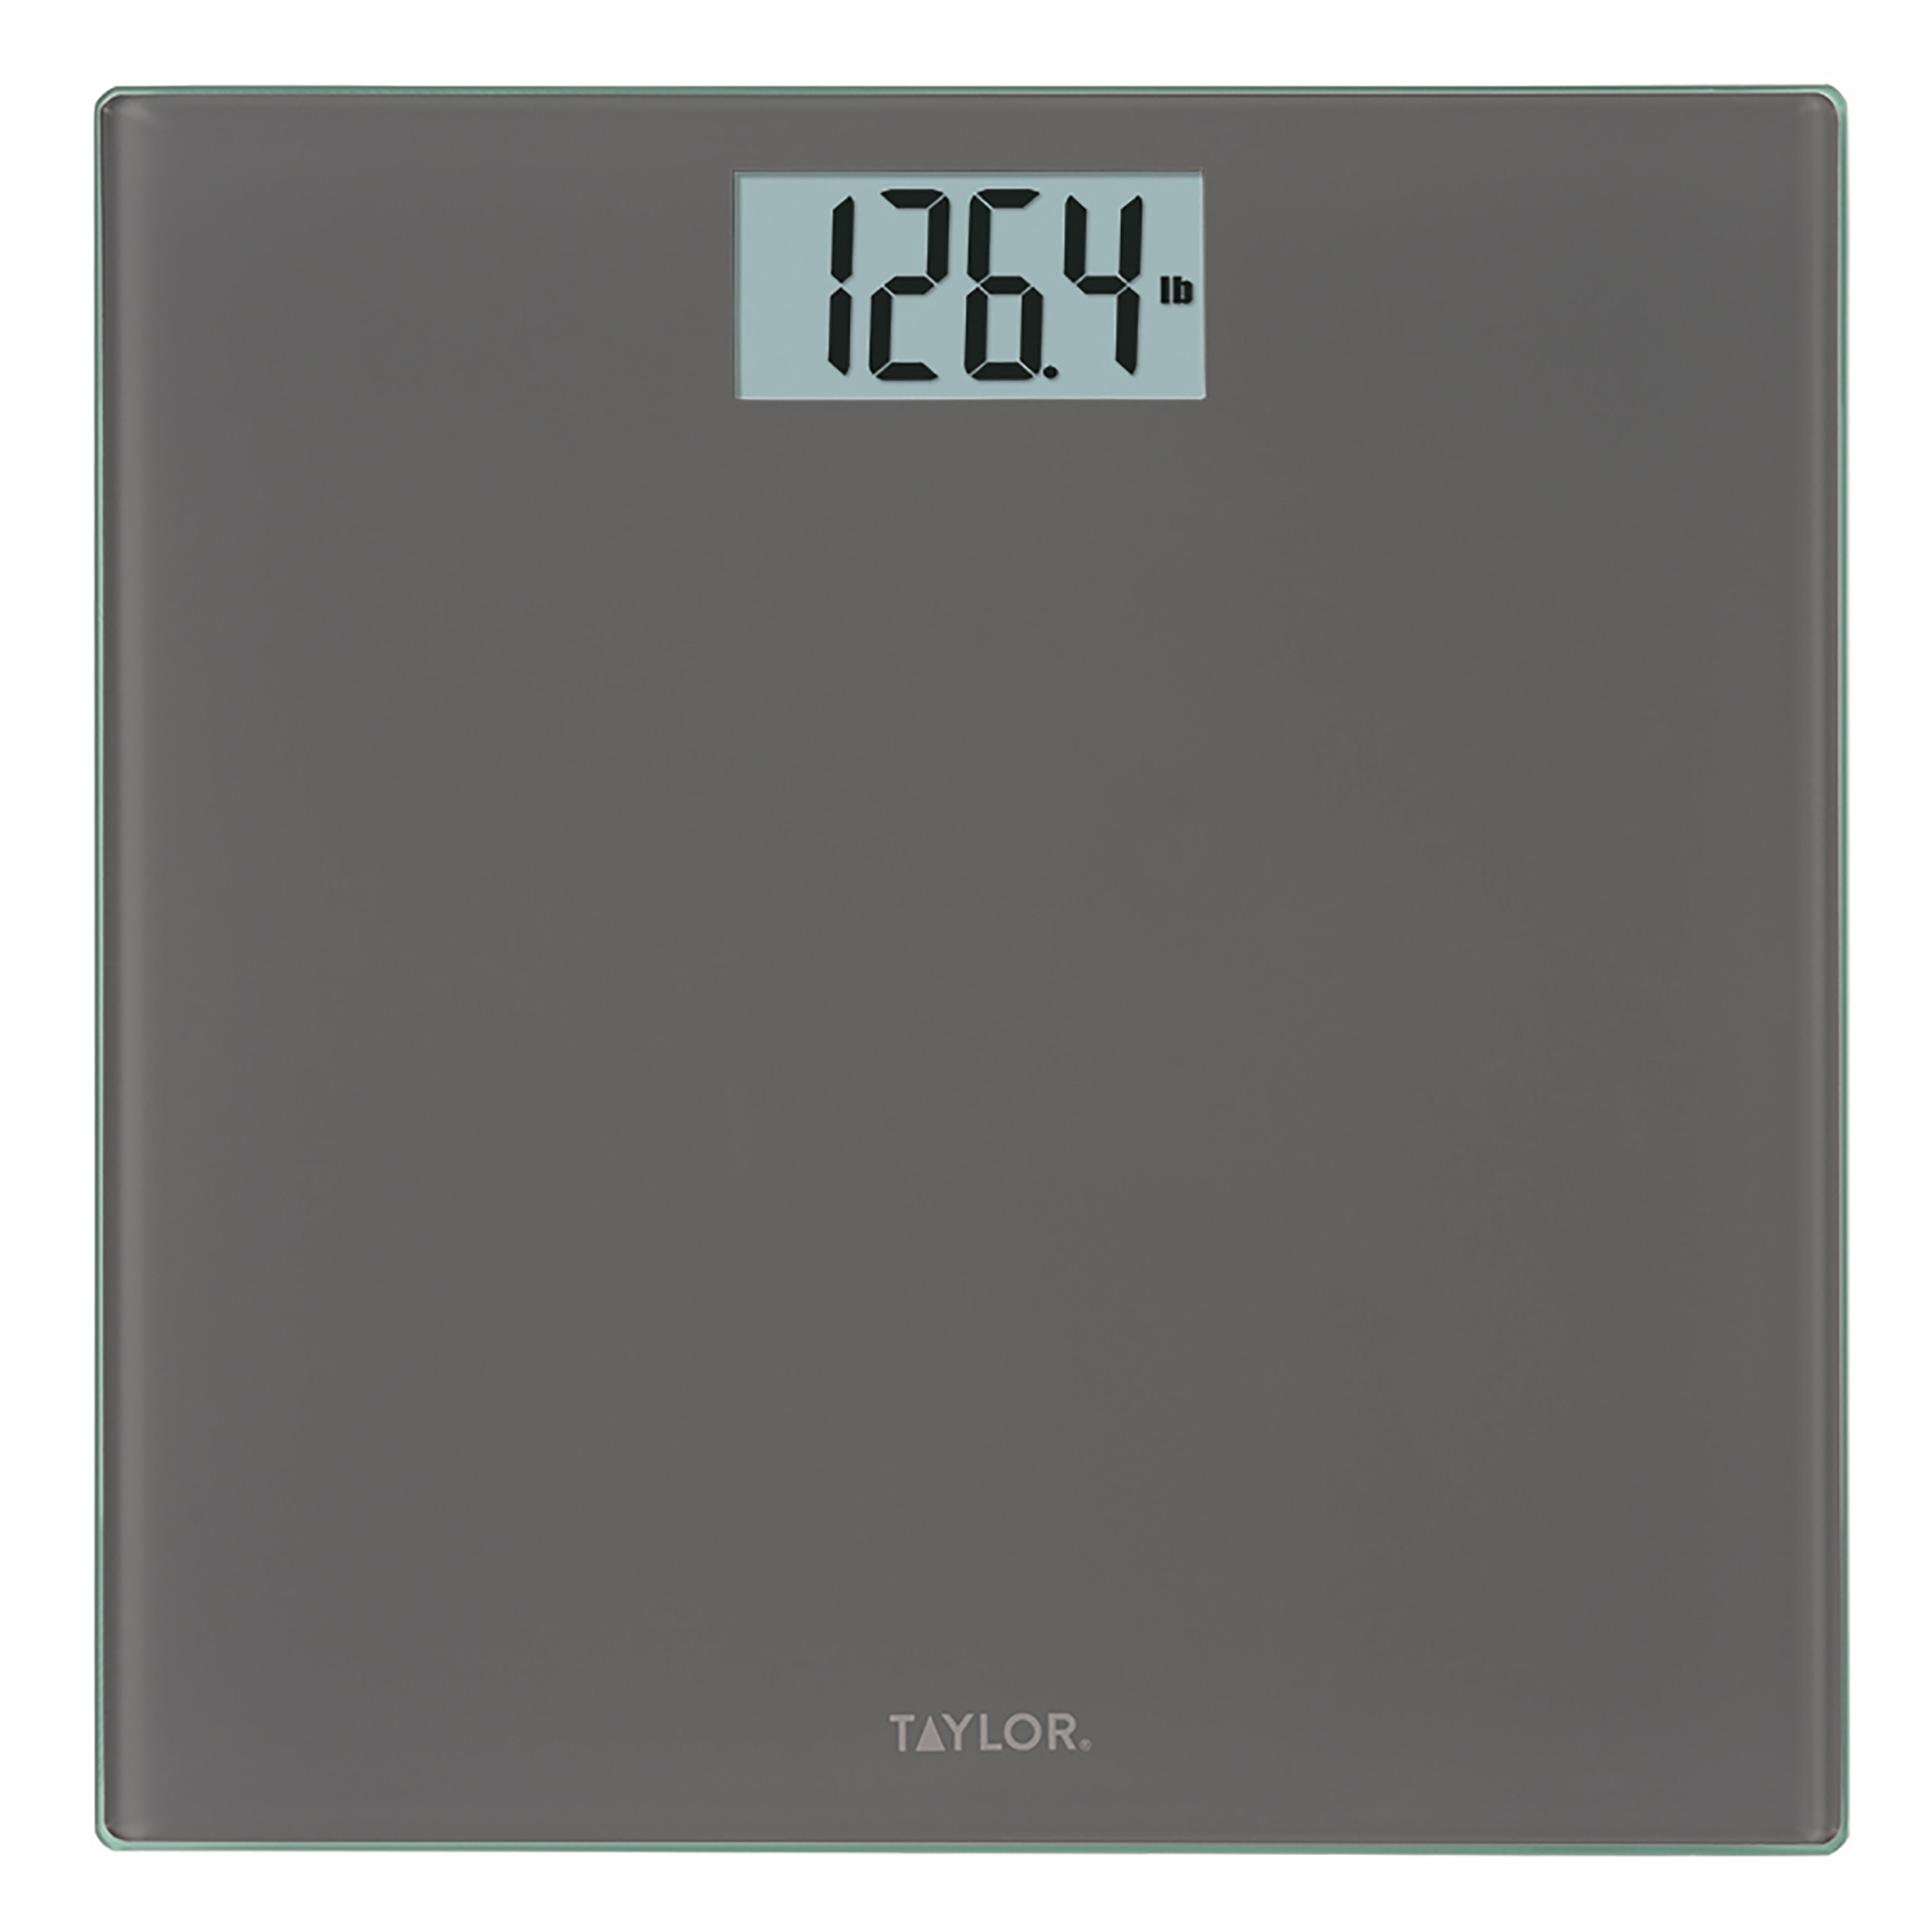 Digital Bathroom Scale with Black Textured Finish